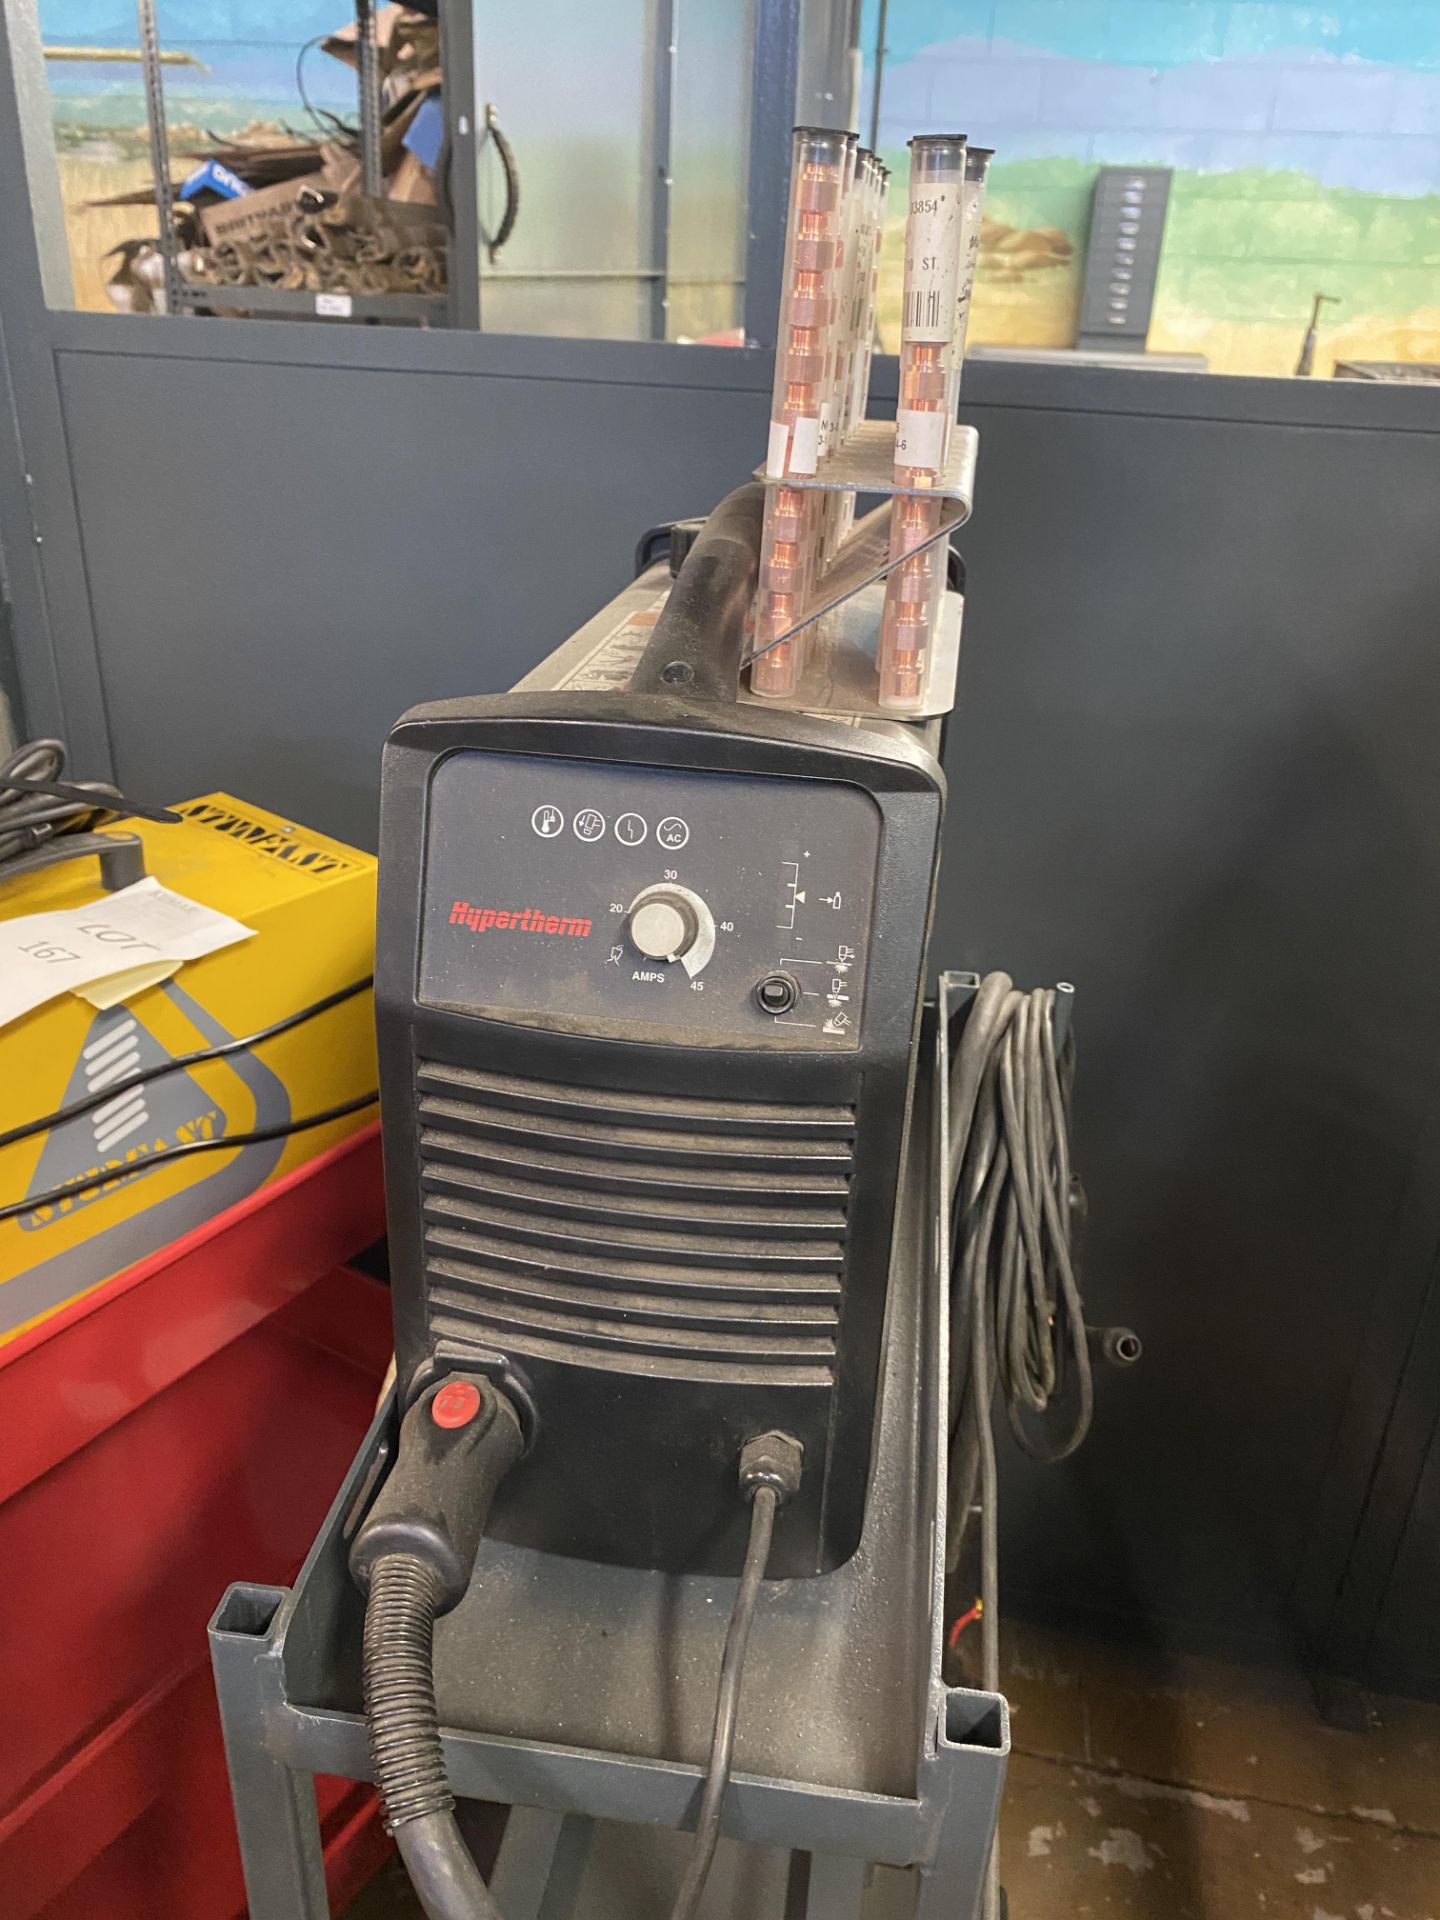 Hypertherm Powermax 45 Plasma Cutter with Trolley and Quantity of Consumable Parts/Tips Etc - Image 12 of 19